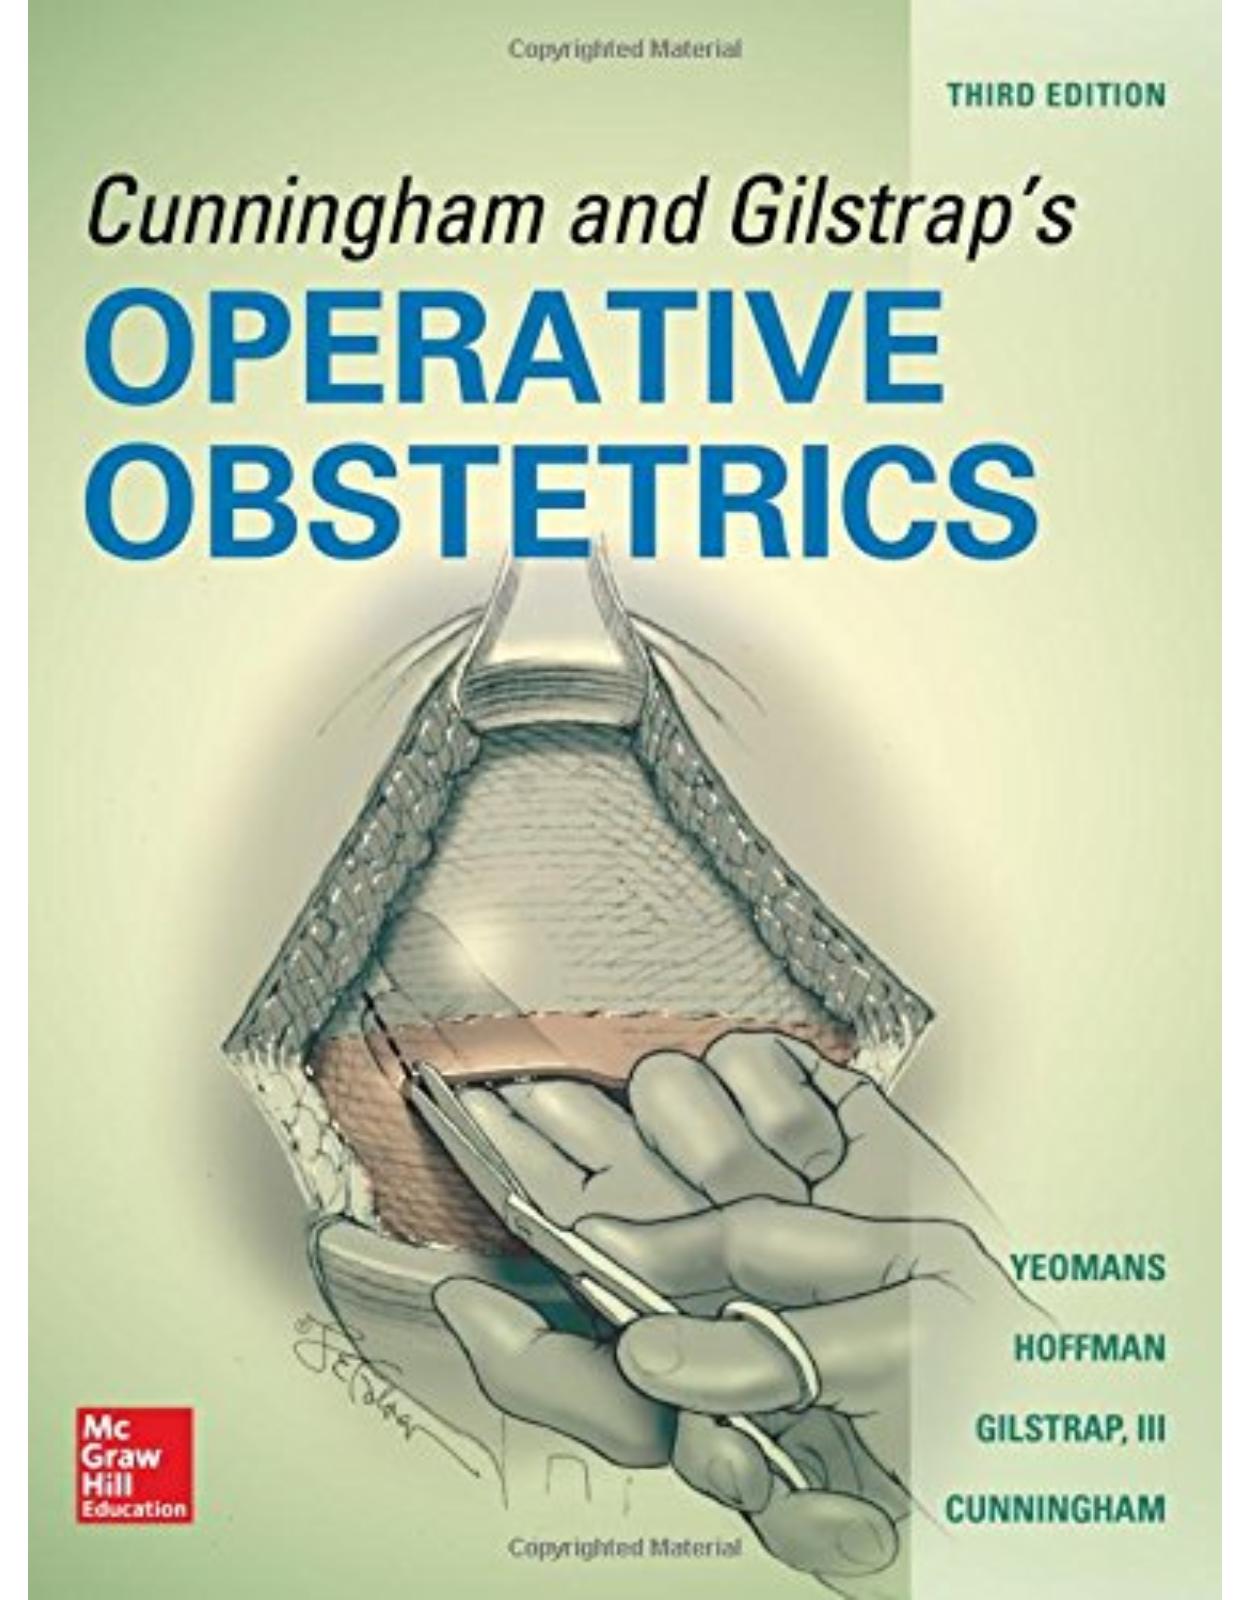 Cunningham and Gilstrap’s Operative Obstetrics, Third Edition 